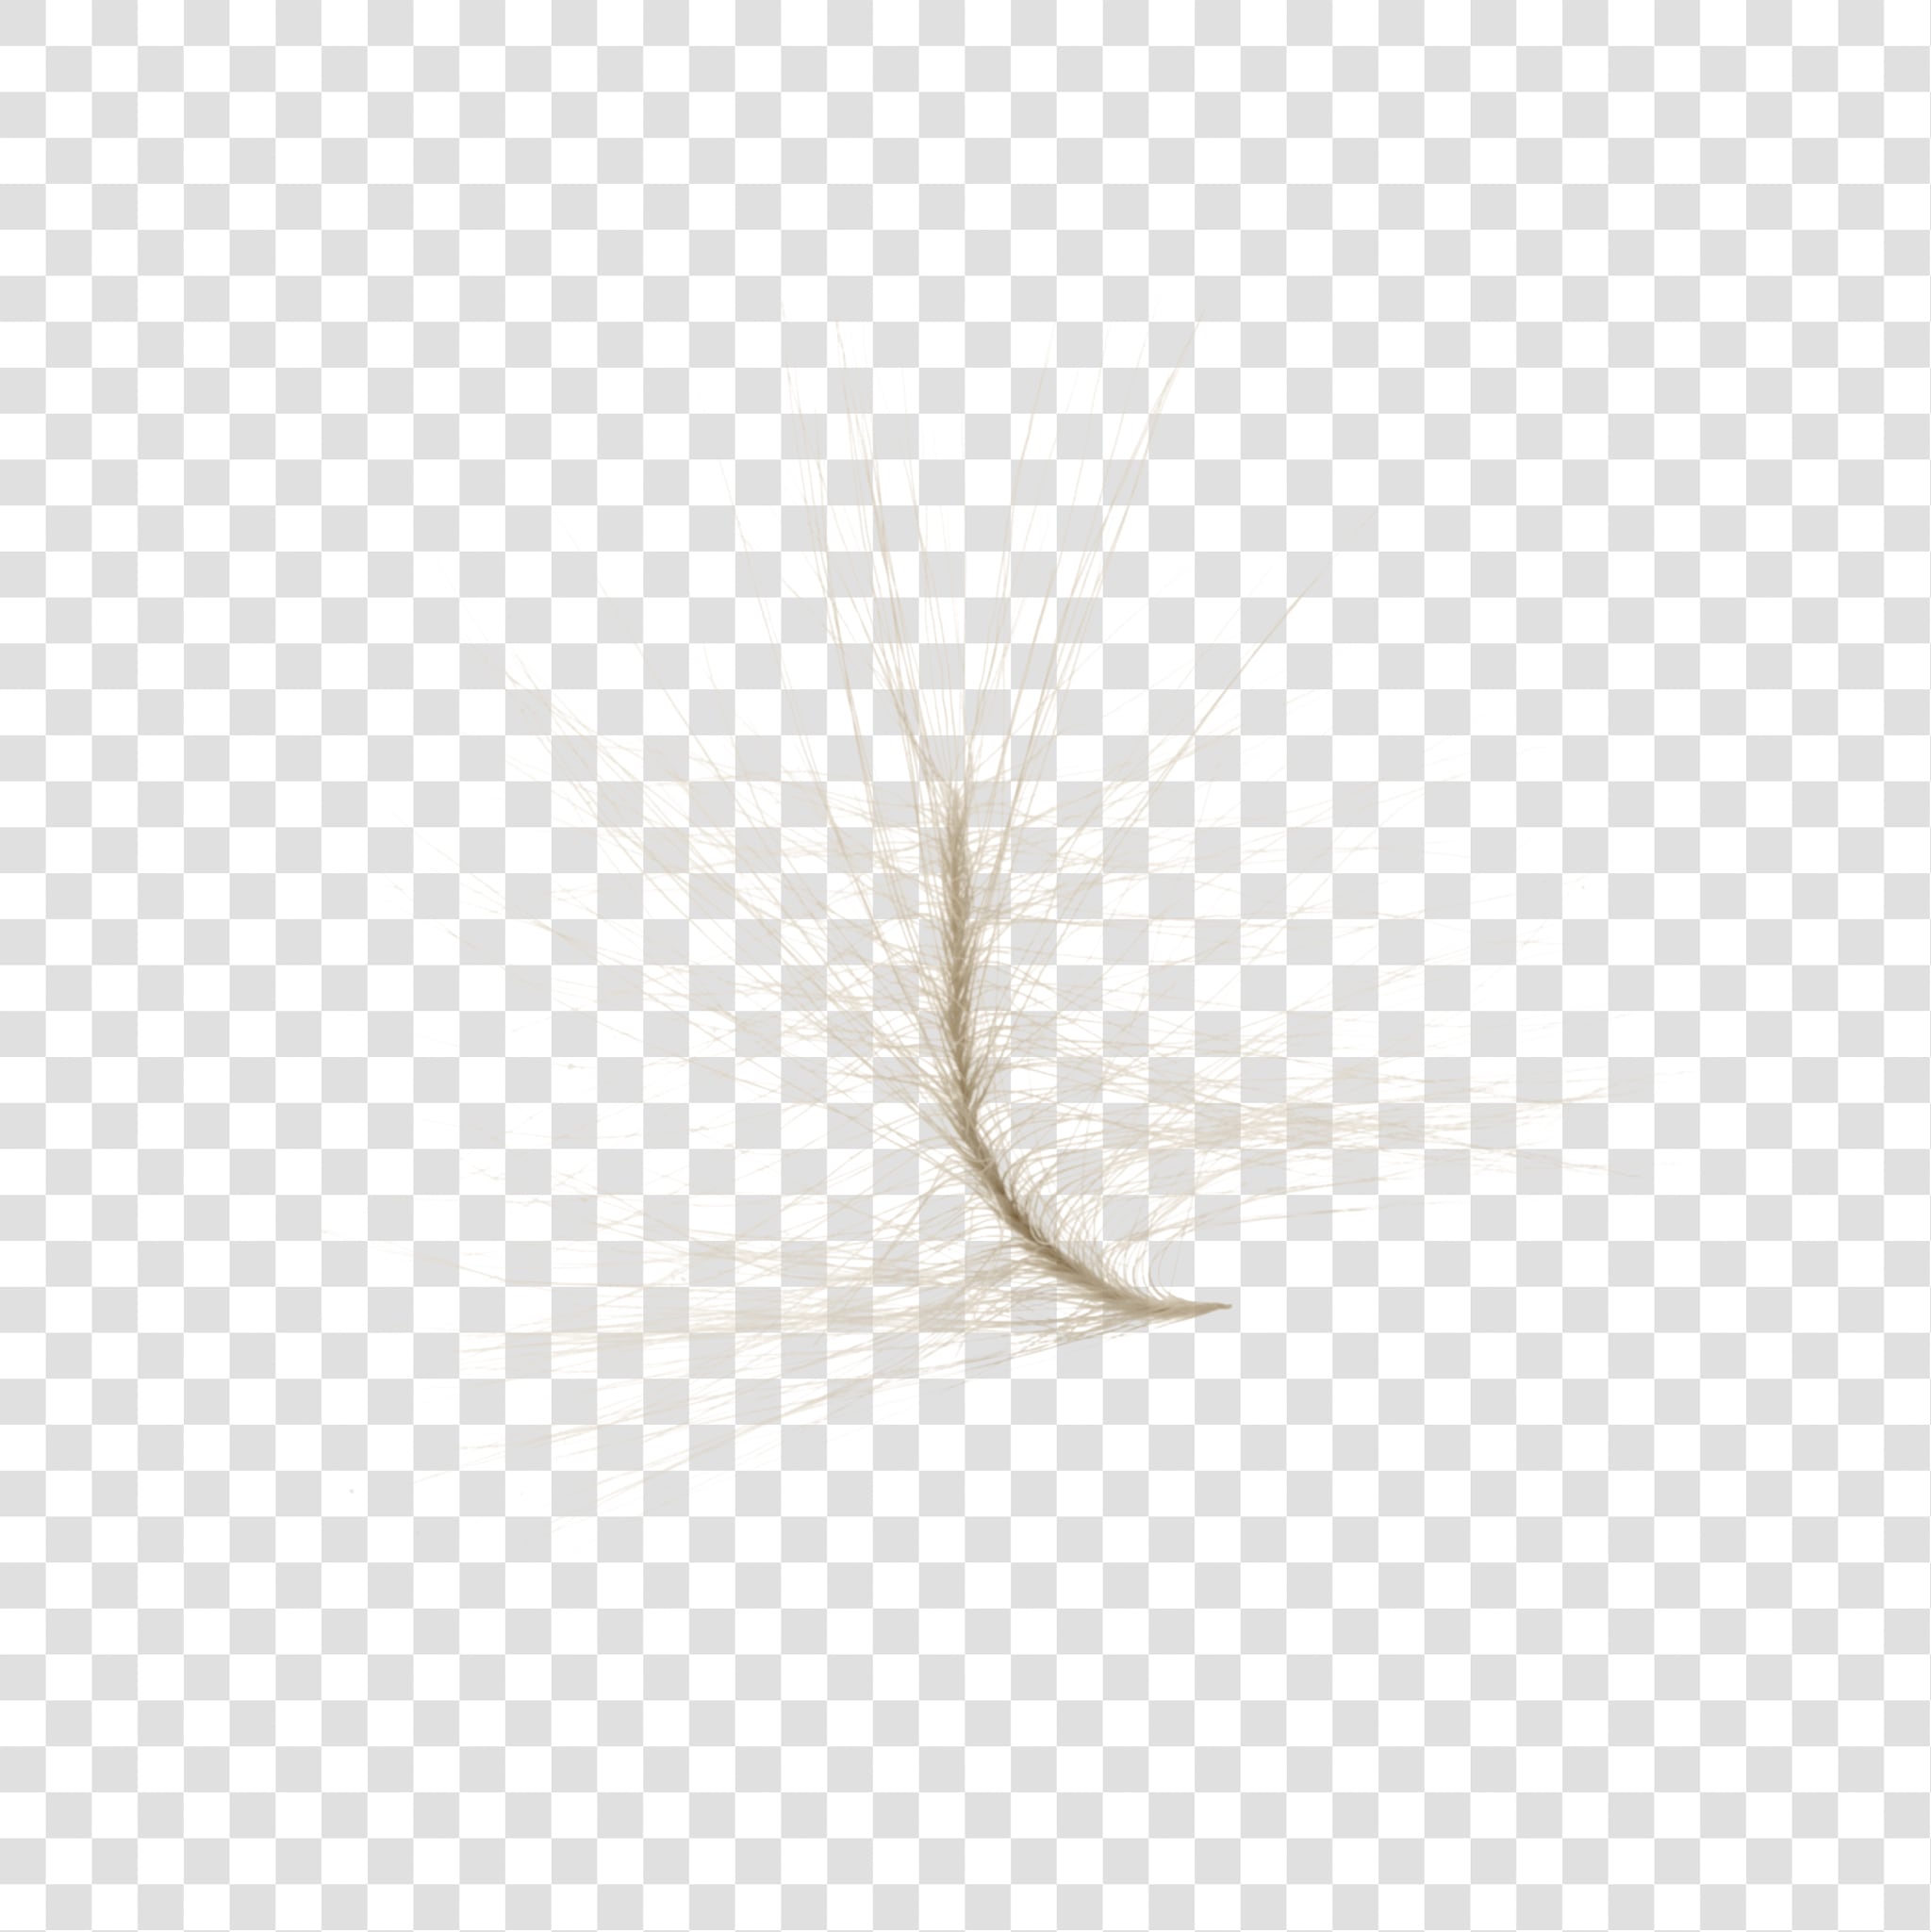 Dried flower PSD isolated image